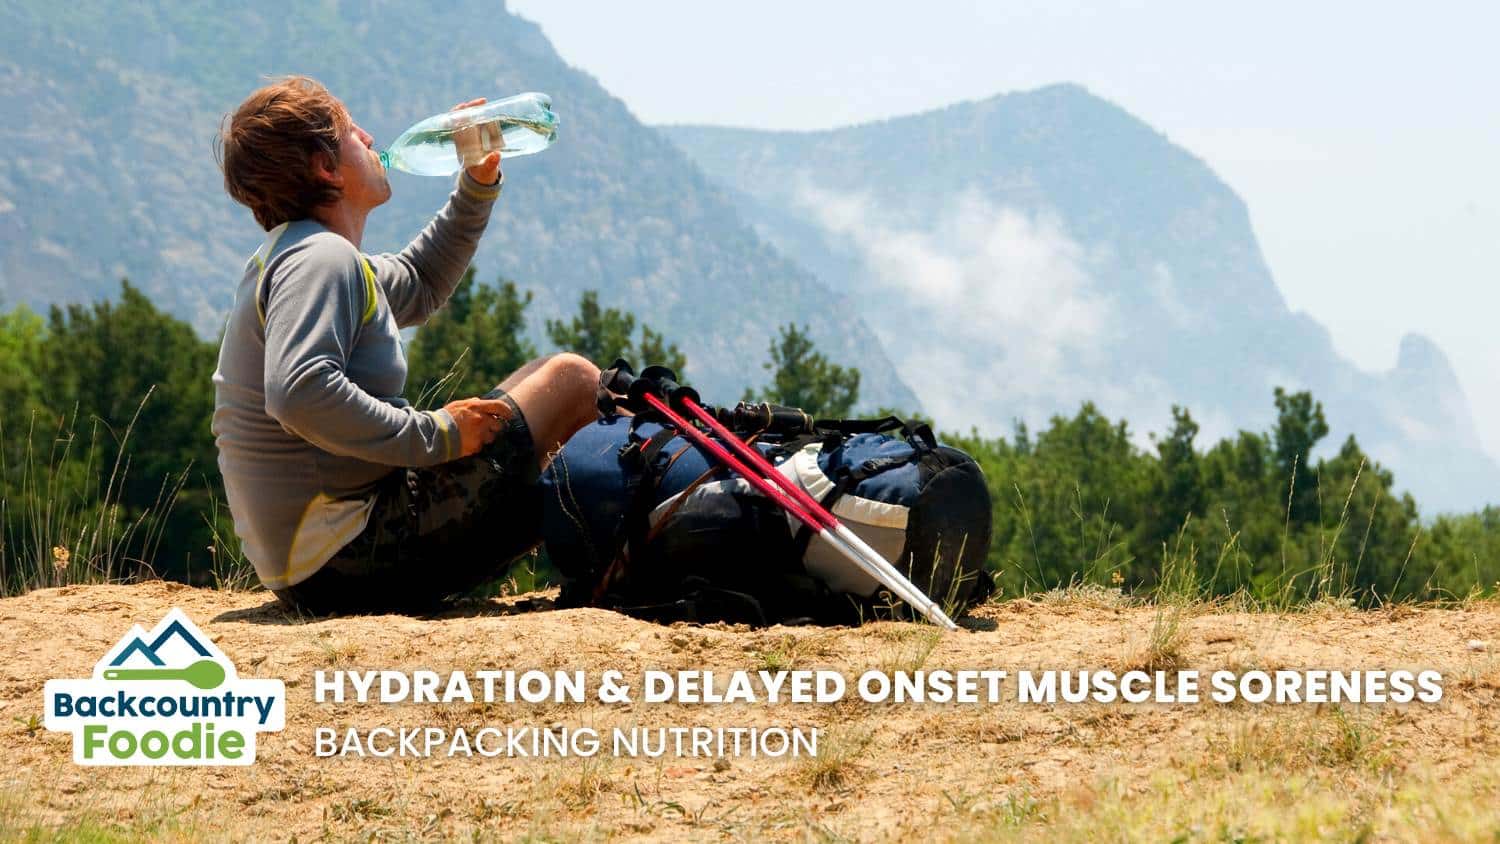 Backcountry Foodie Blog Hydration and Delayed Onset Muscle Soreness Backpacking Nutrition thumbnail